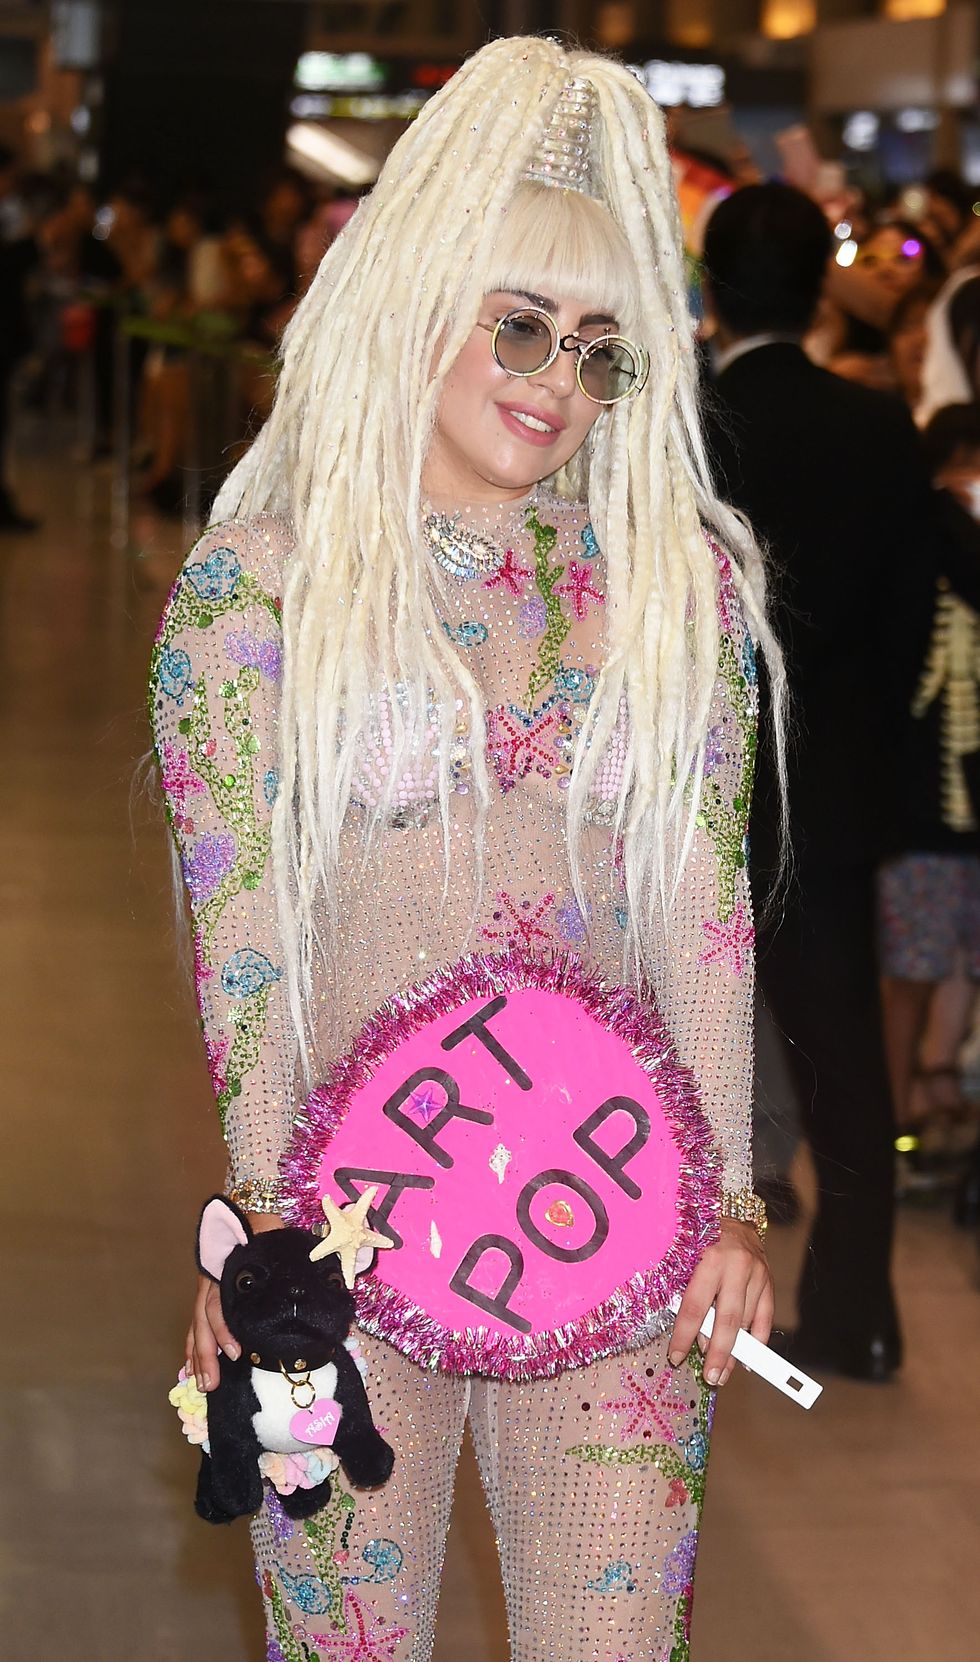 Lady Gaga promoting Art Pop in Japan in sequinned jumpsuit - celebrity style photos - fashion - cosmopolitan.co.uk